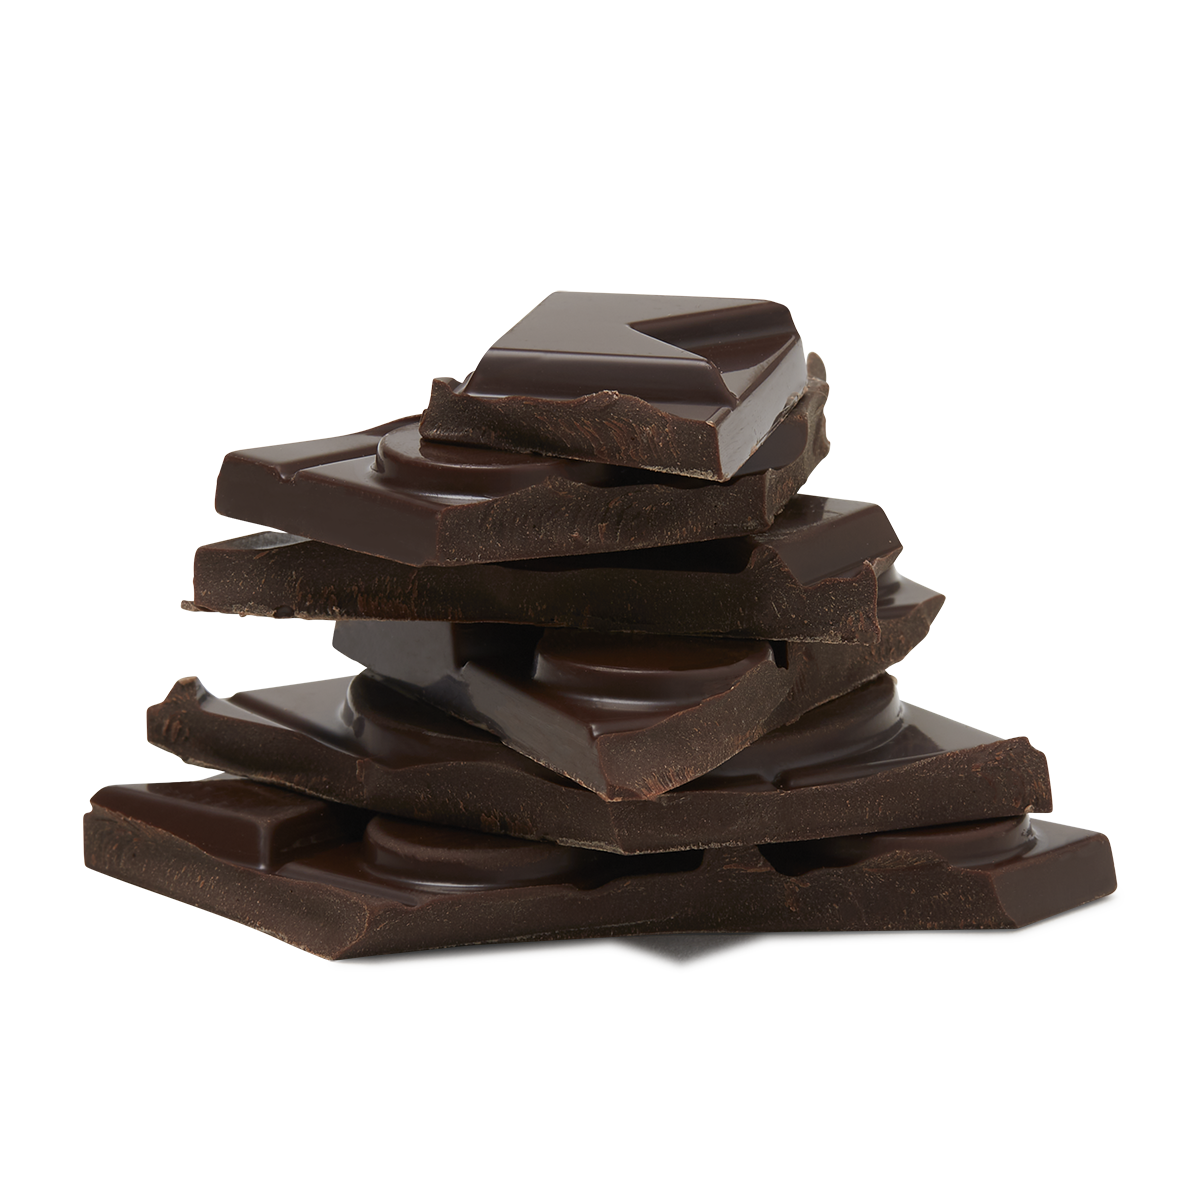 Broken chocolate pieces stacked together